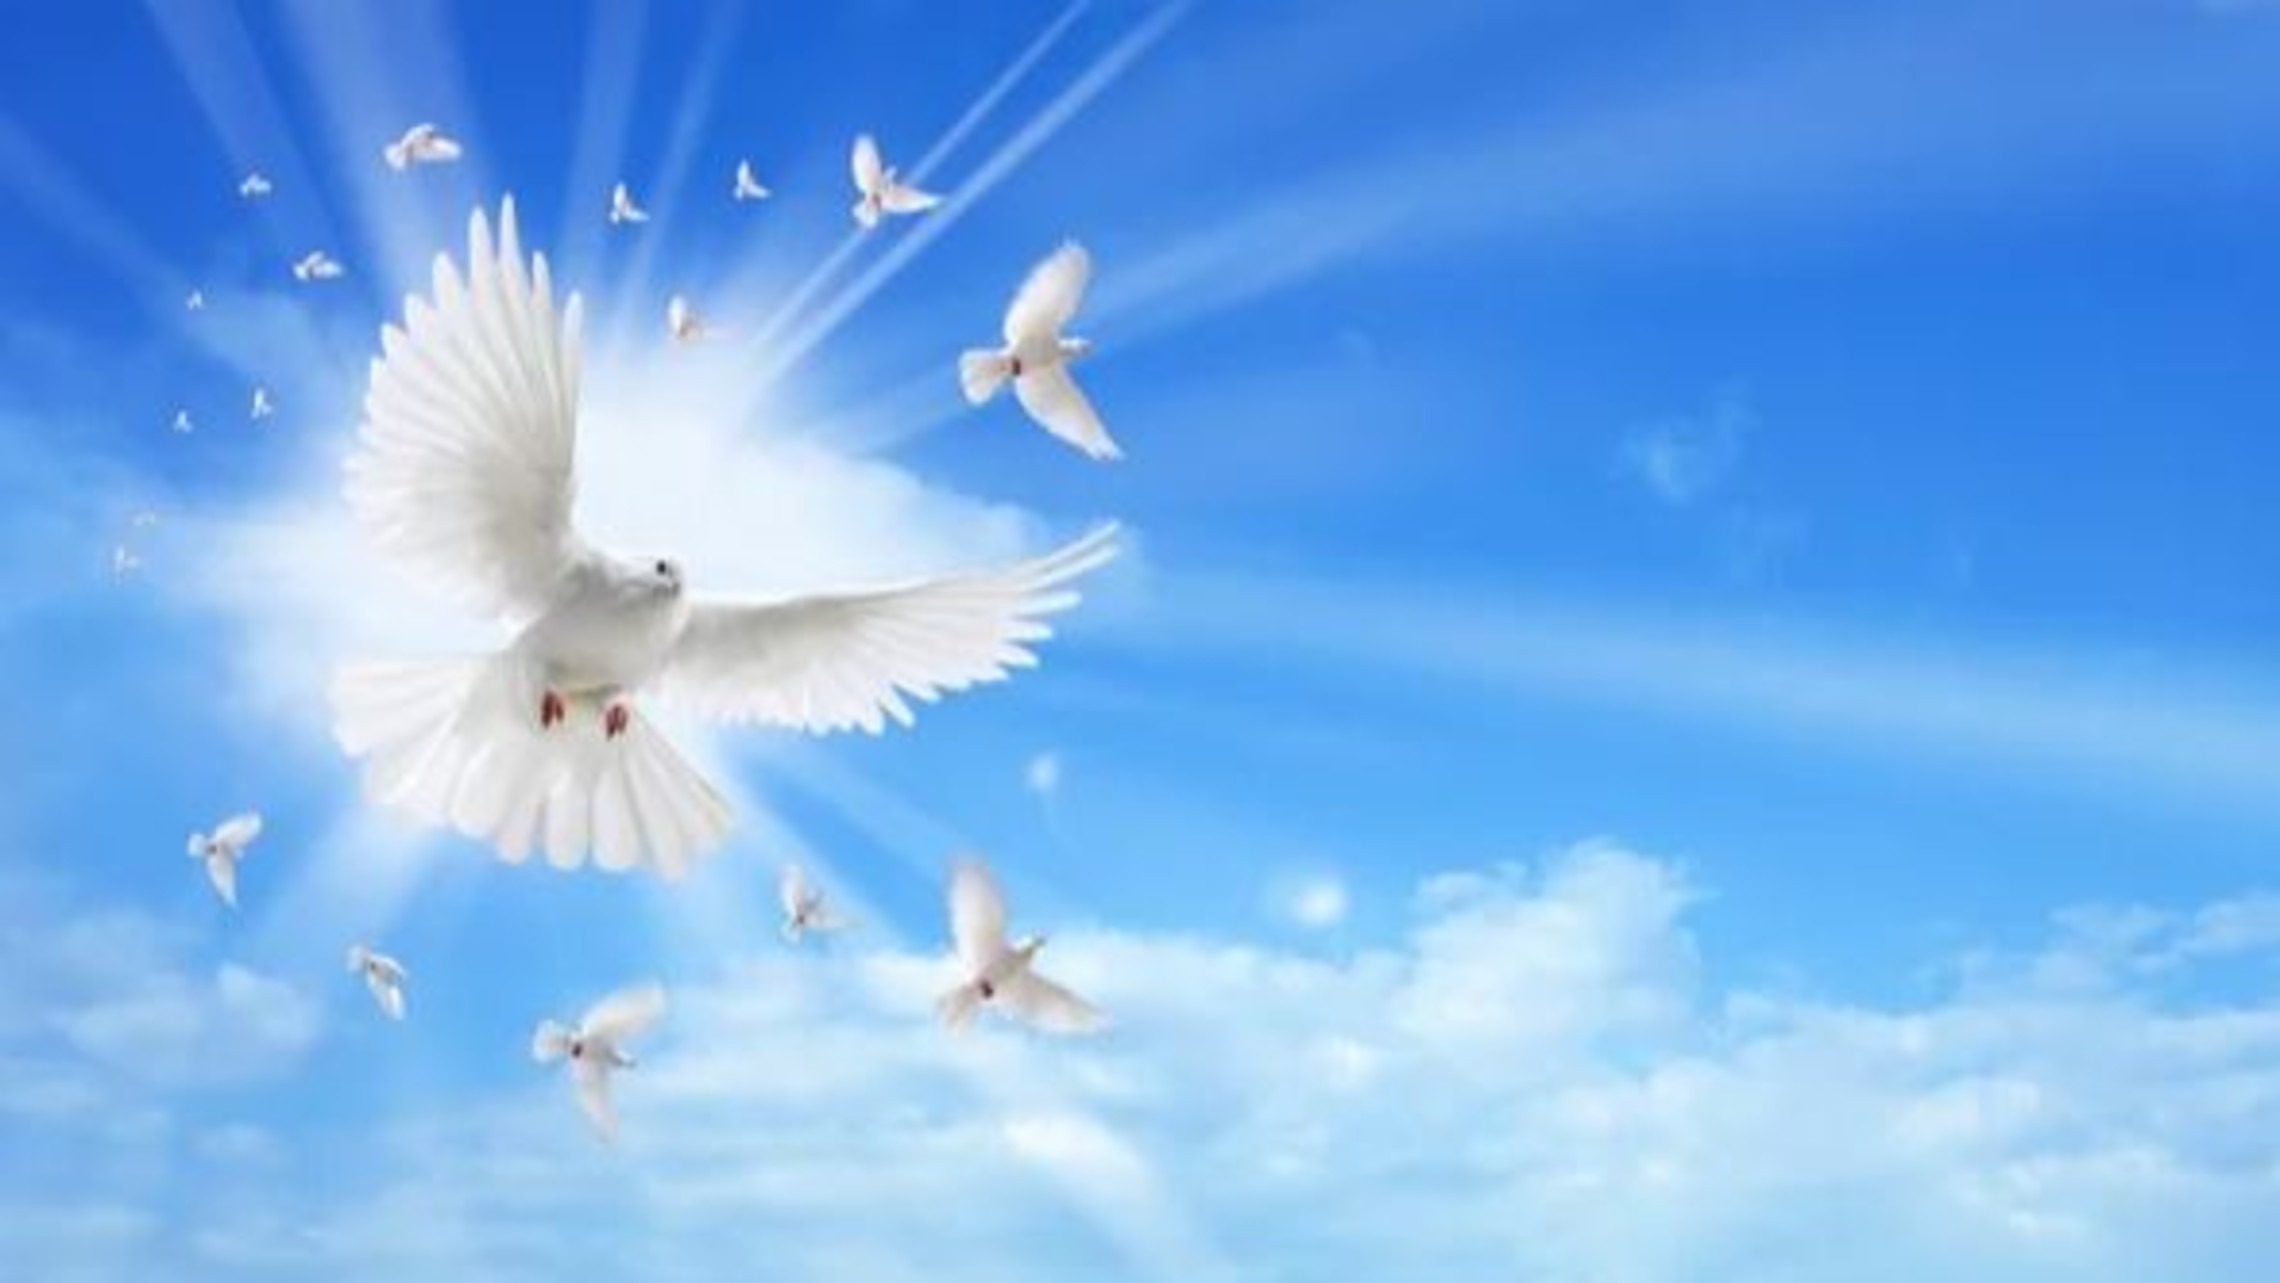 What are the Gifts of the Holy Spirit about?